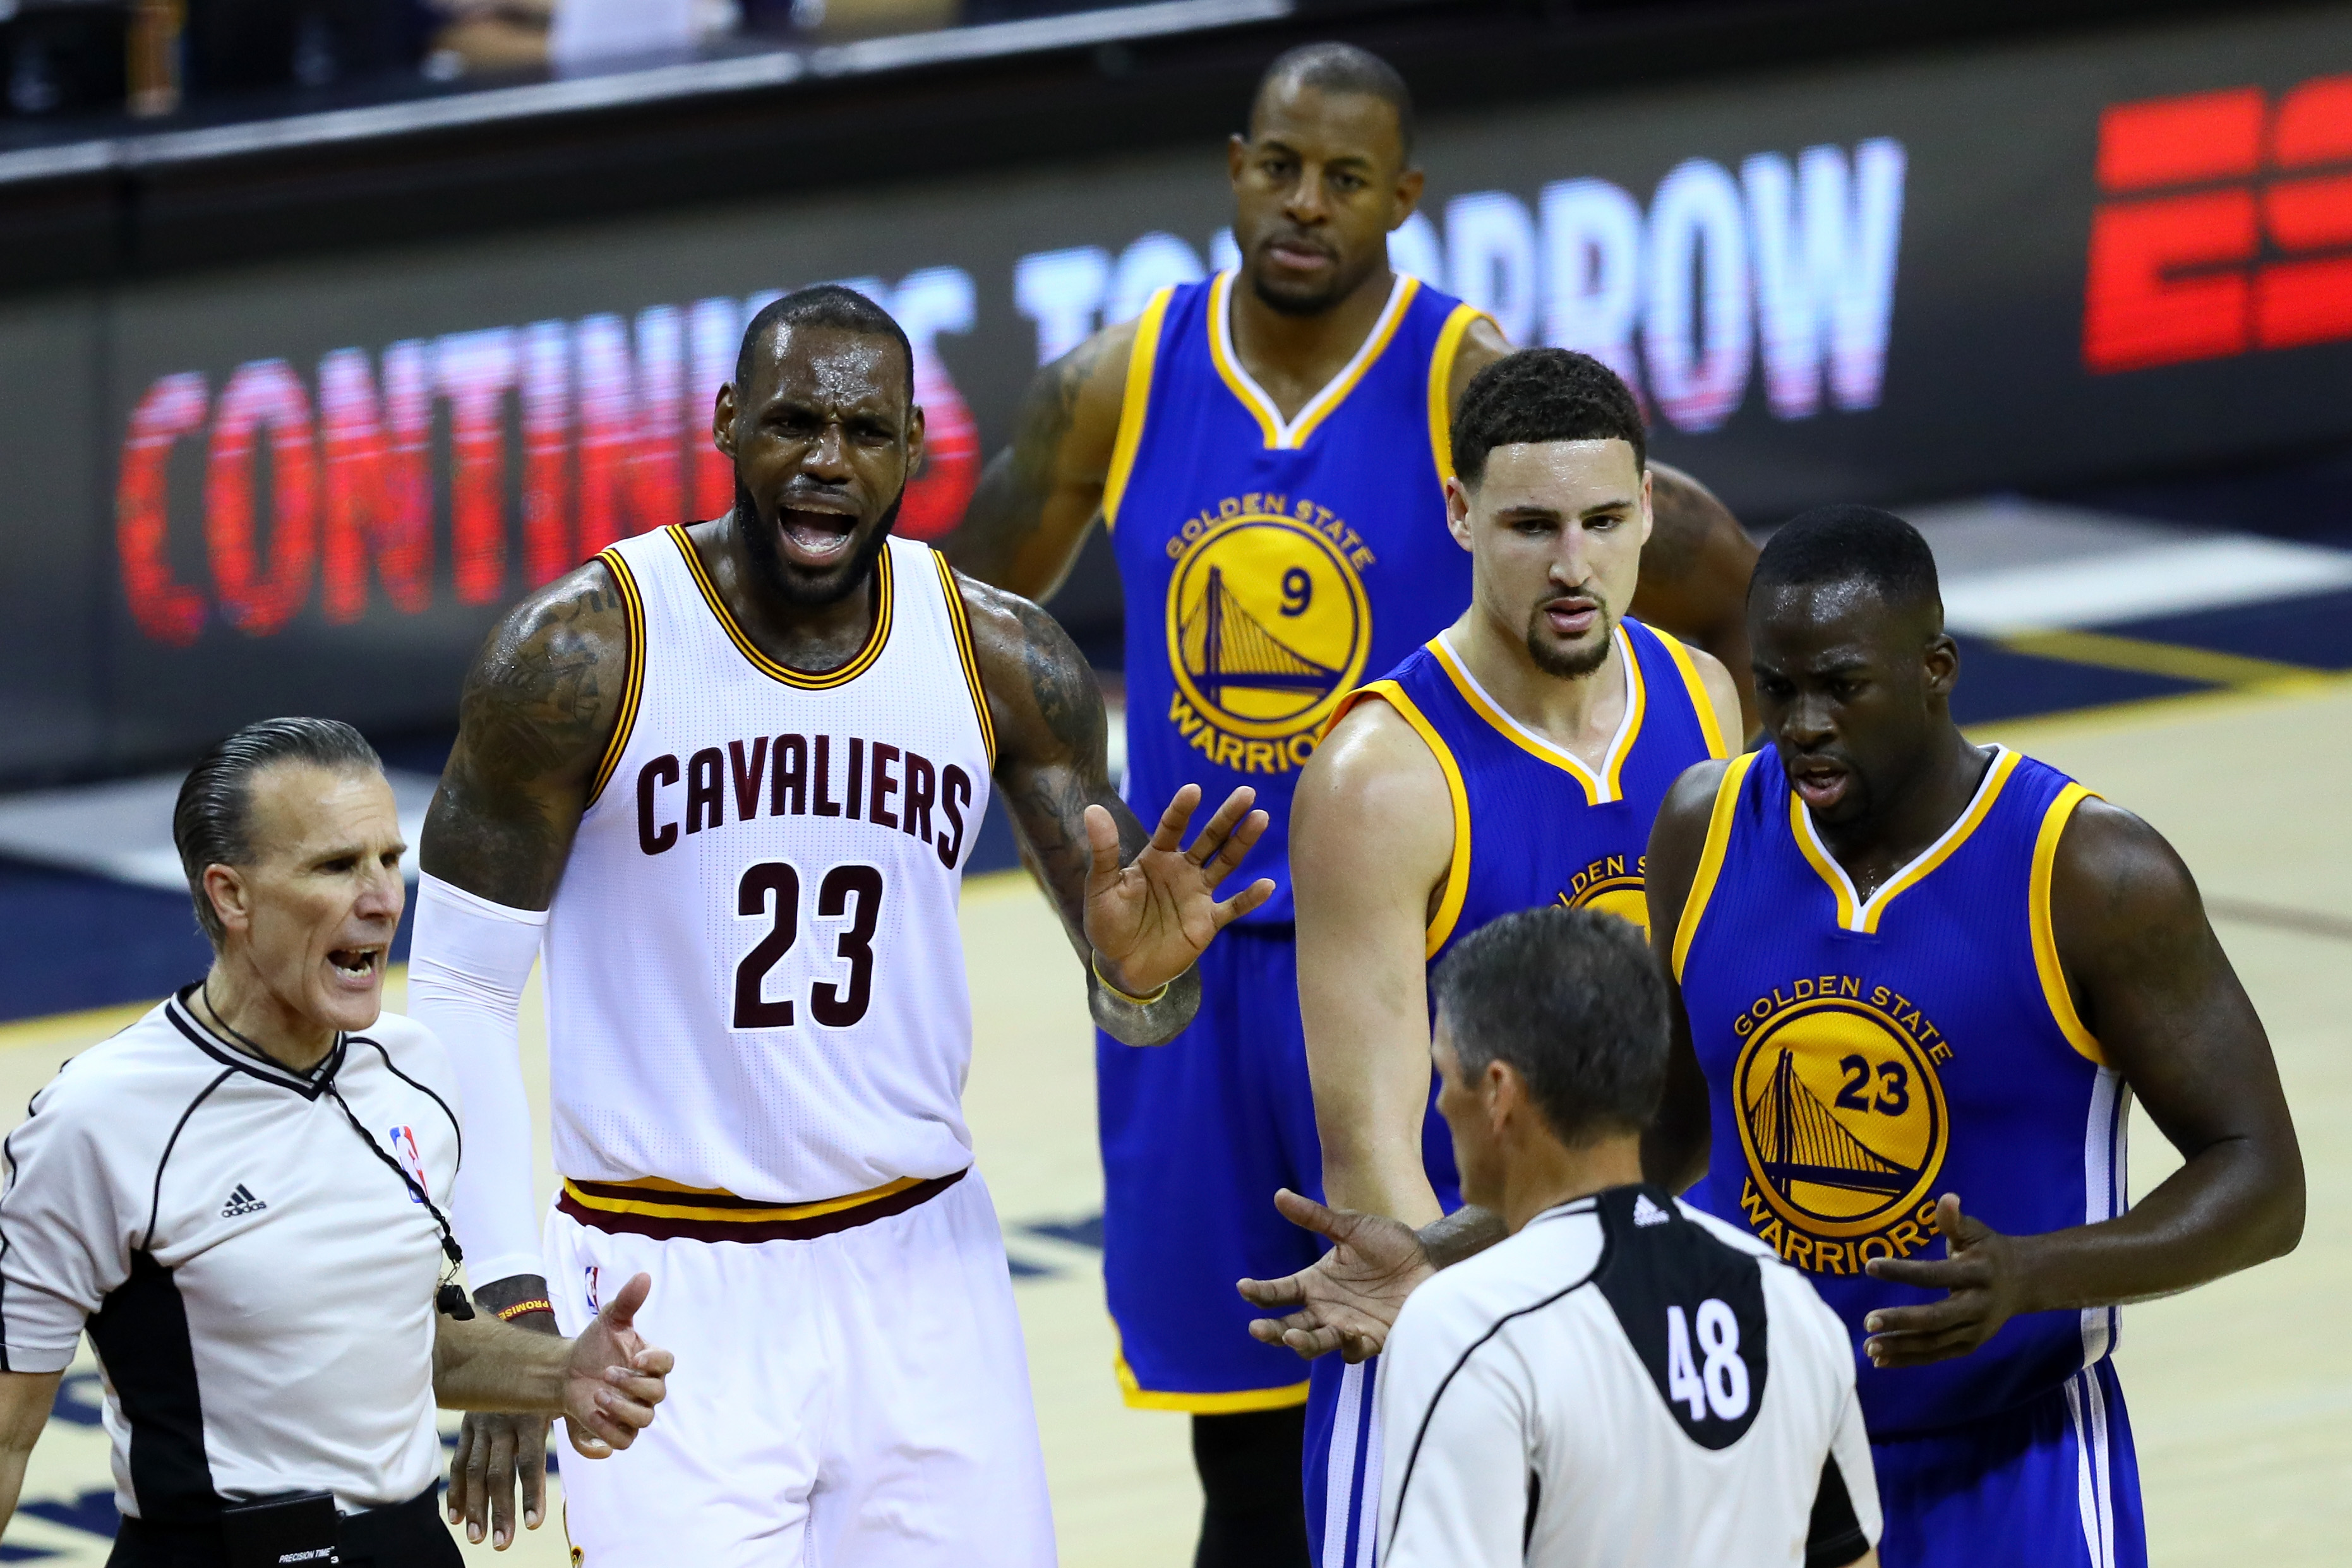 Are NBA Finals Rigged? Game 7 Means Big Money for ABC, NBA Money